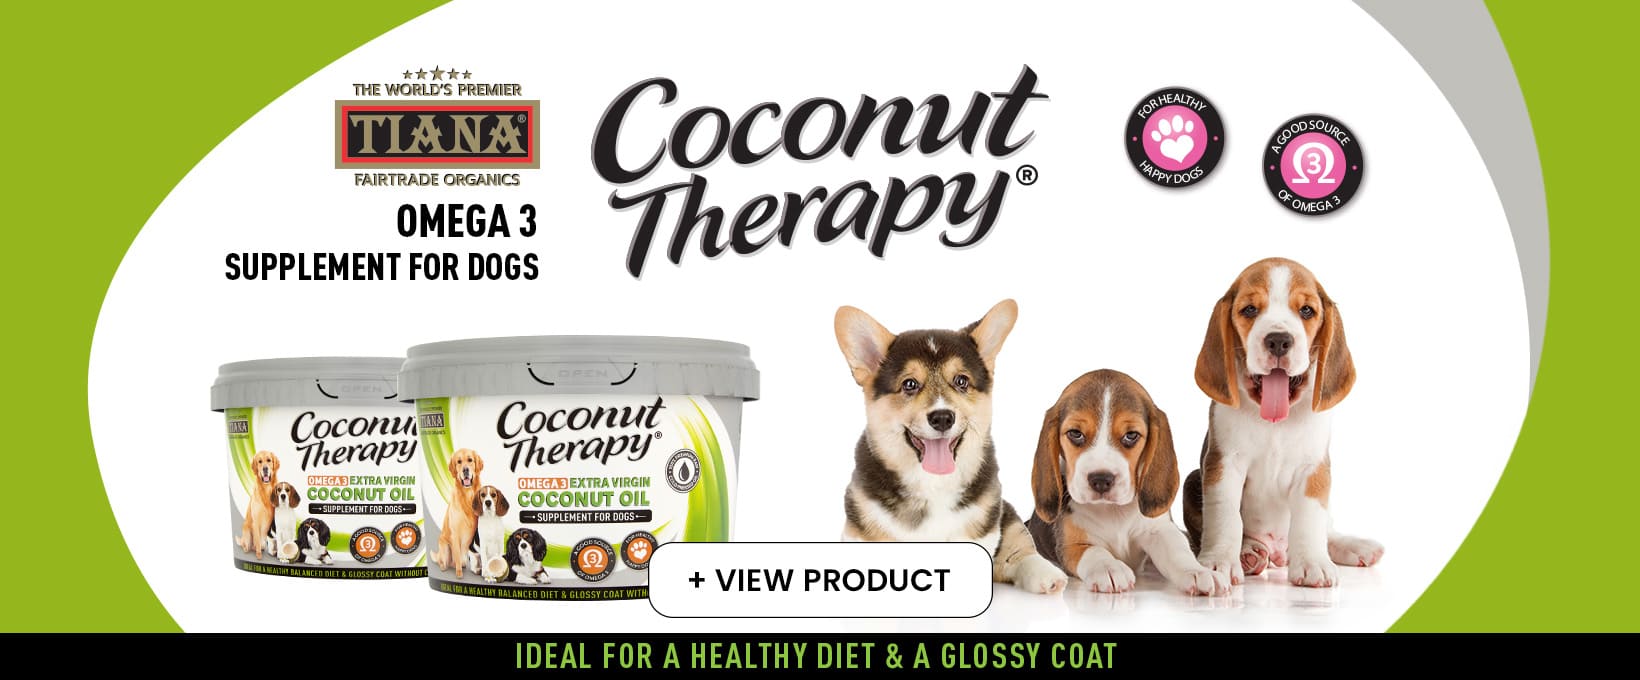 coconut therapy for dogs